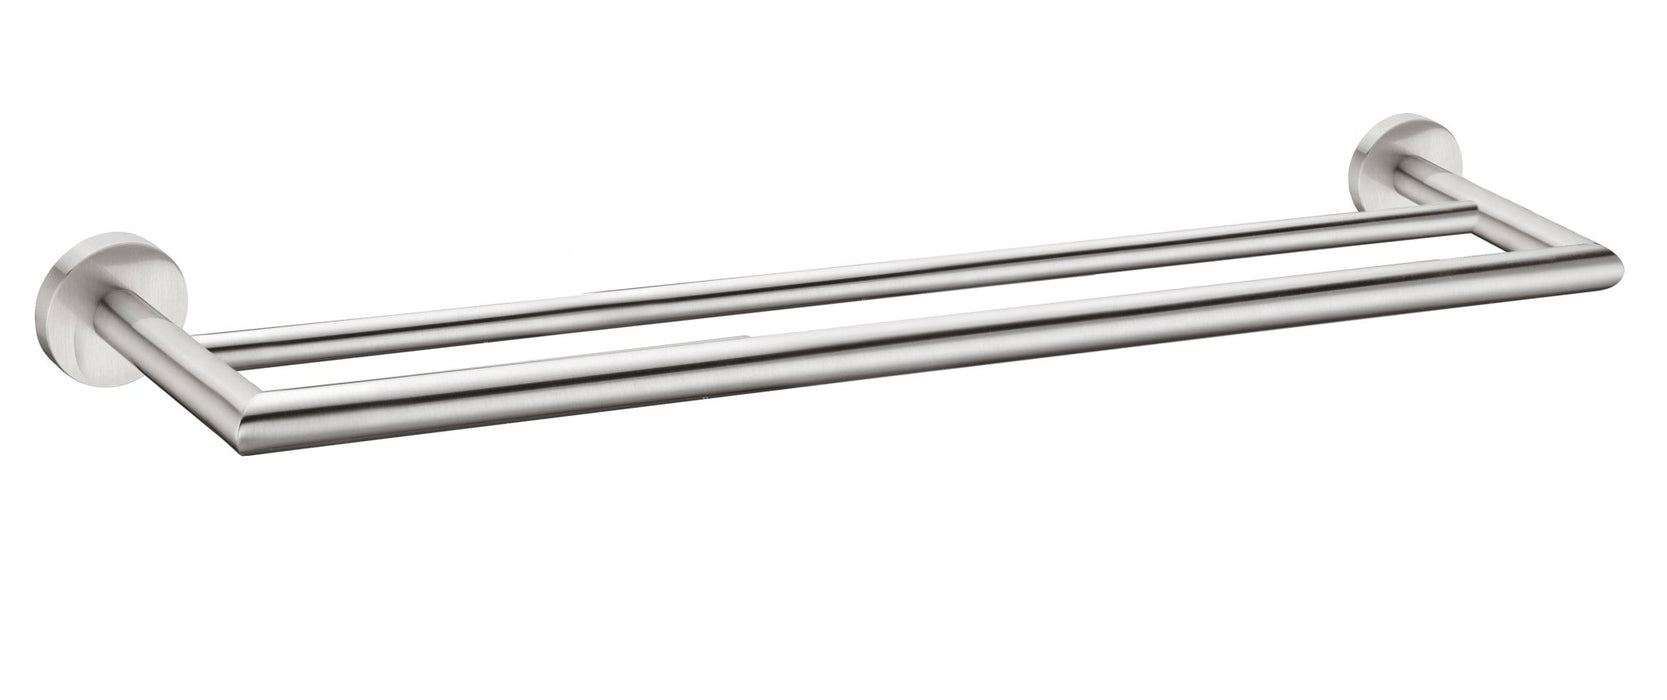 NERO DOLCE DOUBLE TOWEL RAIL 700MM BRUSHED NICKEL - Ideal Bathroom CentreNR3630dBN